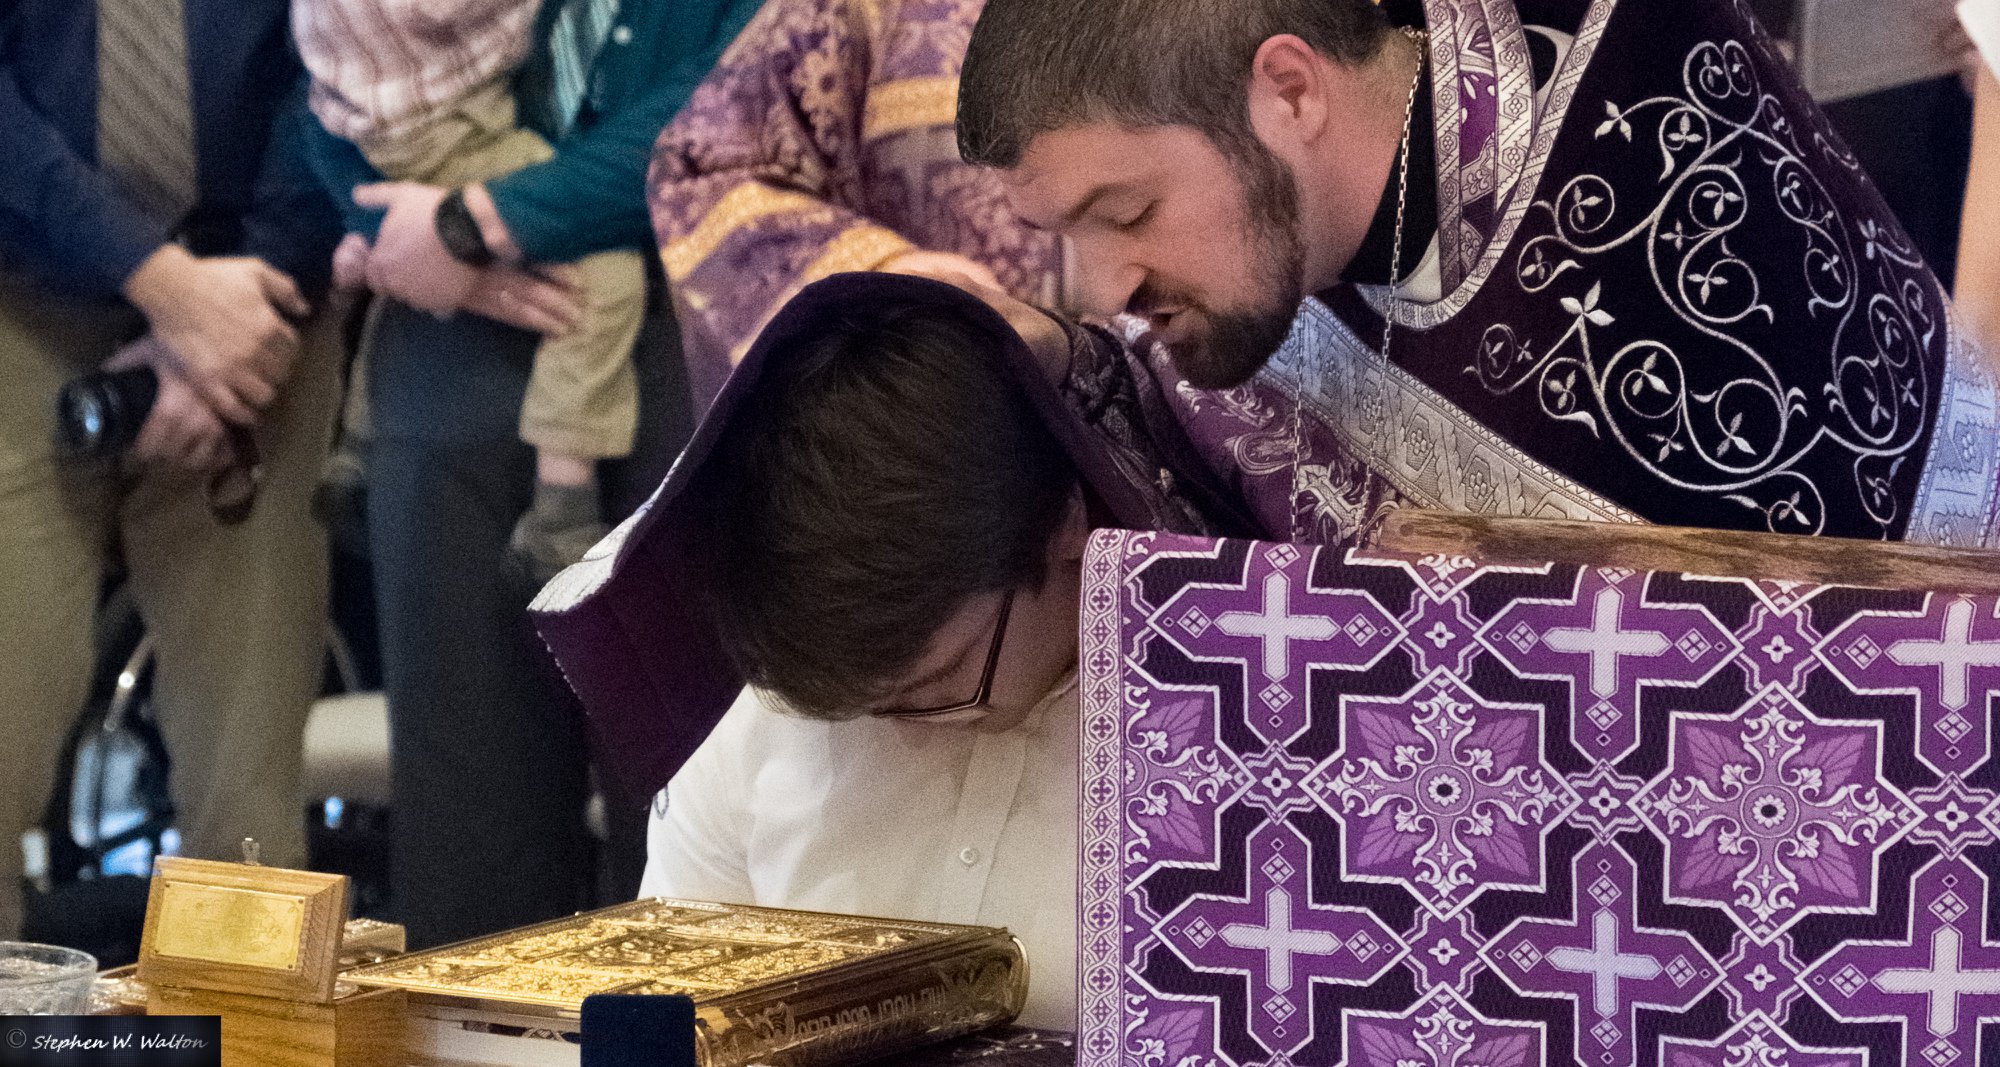  priest covering head of young male with stole offering prayers of absolution 